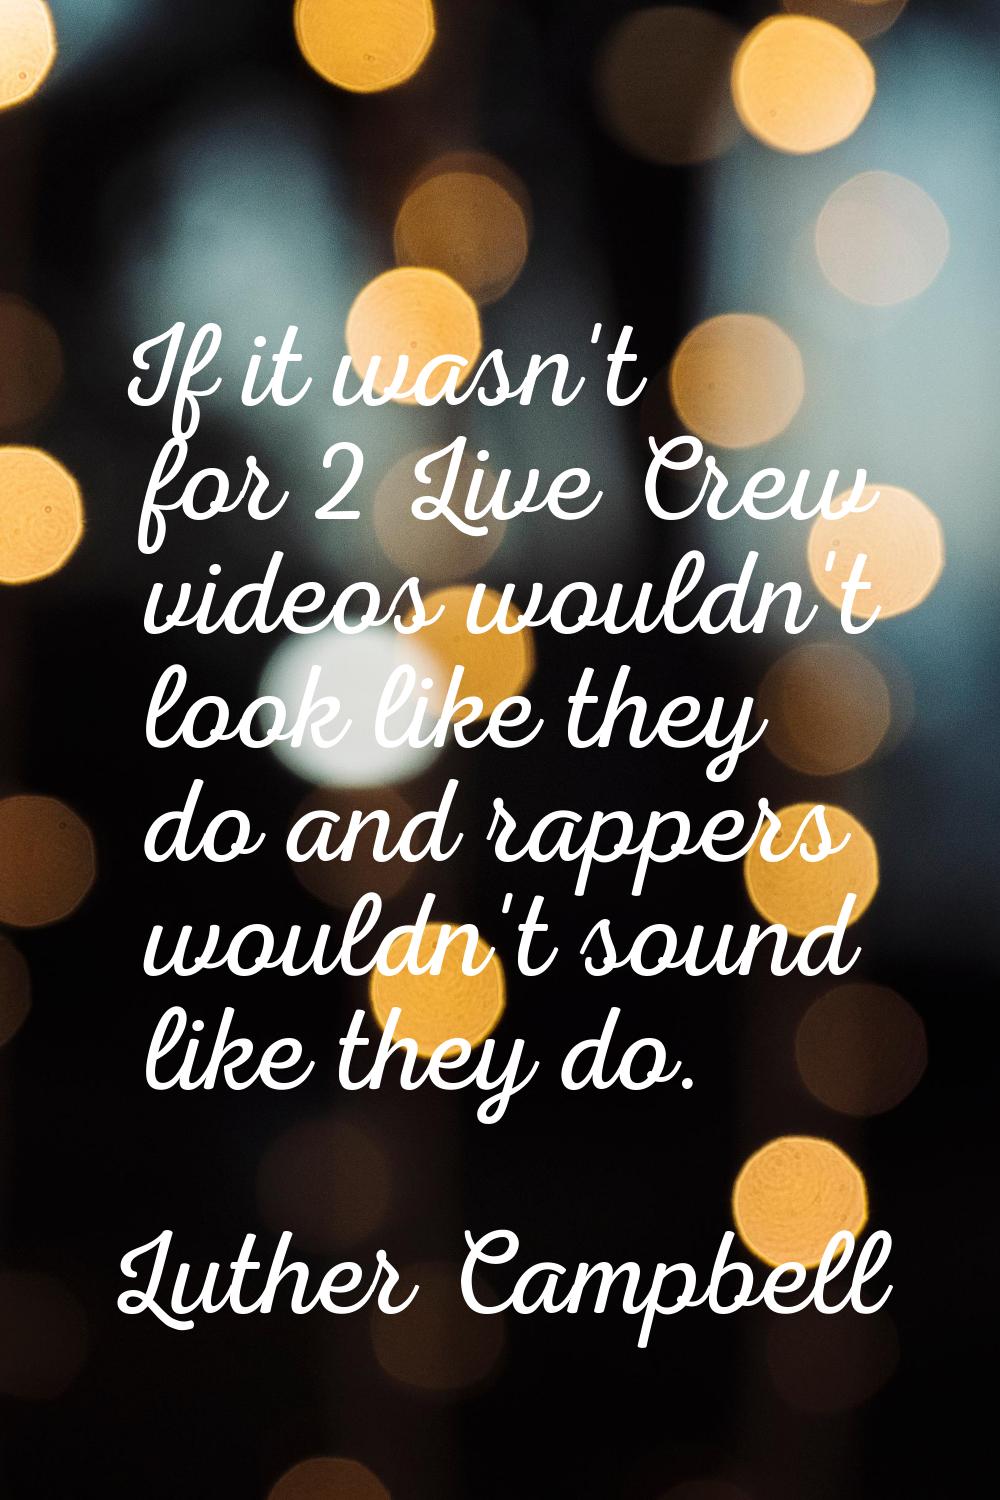 If it wasn't for 2 Live Crew videos wouldn't look like they do and rappers wouldn't sound like they